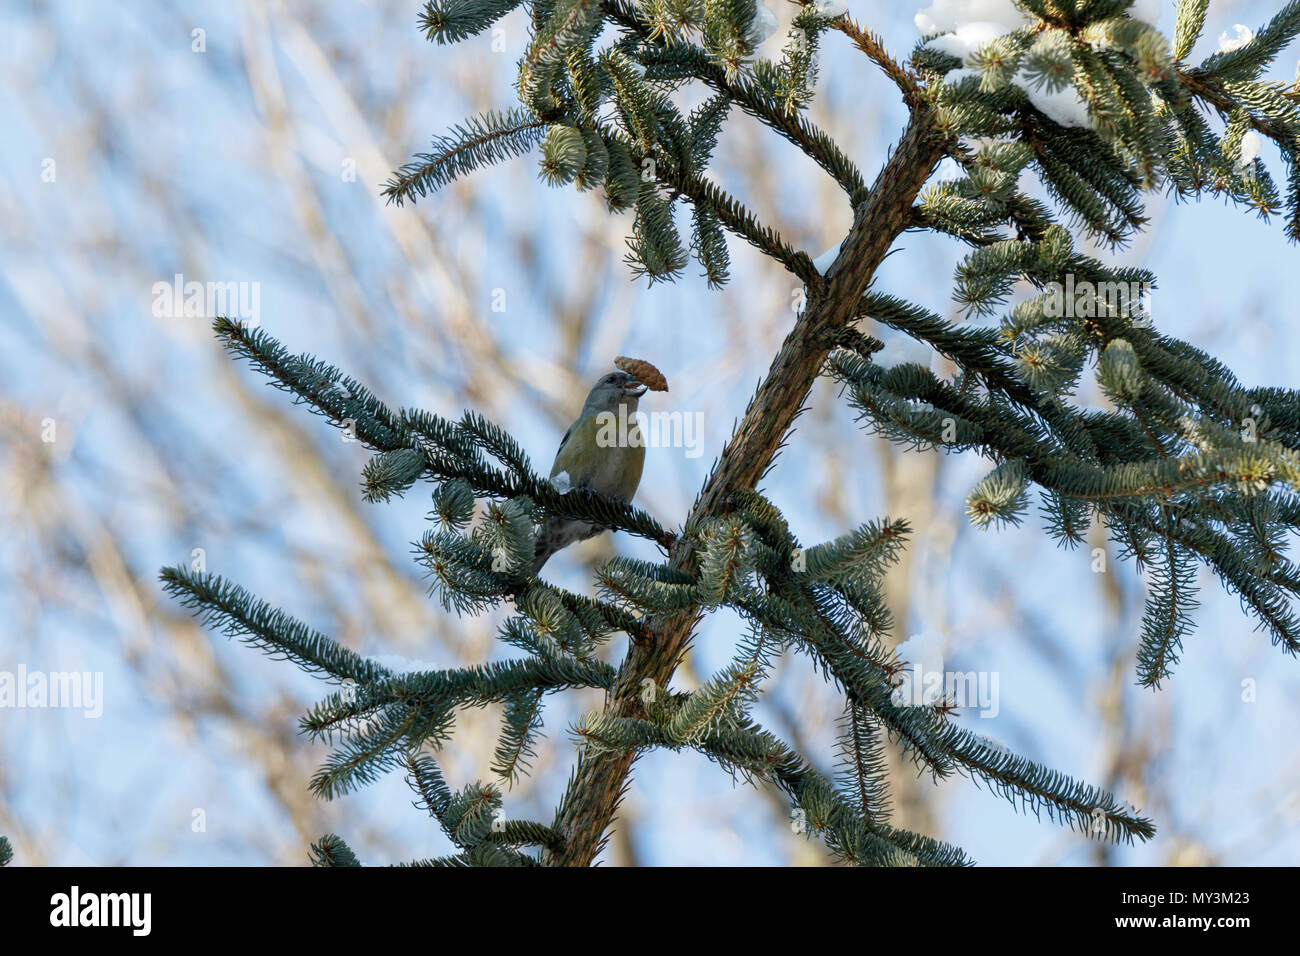 Crossbill (Loxia curvirostra). Russia,  Moscow. Stock Photo